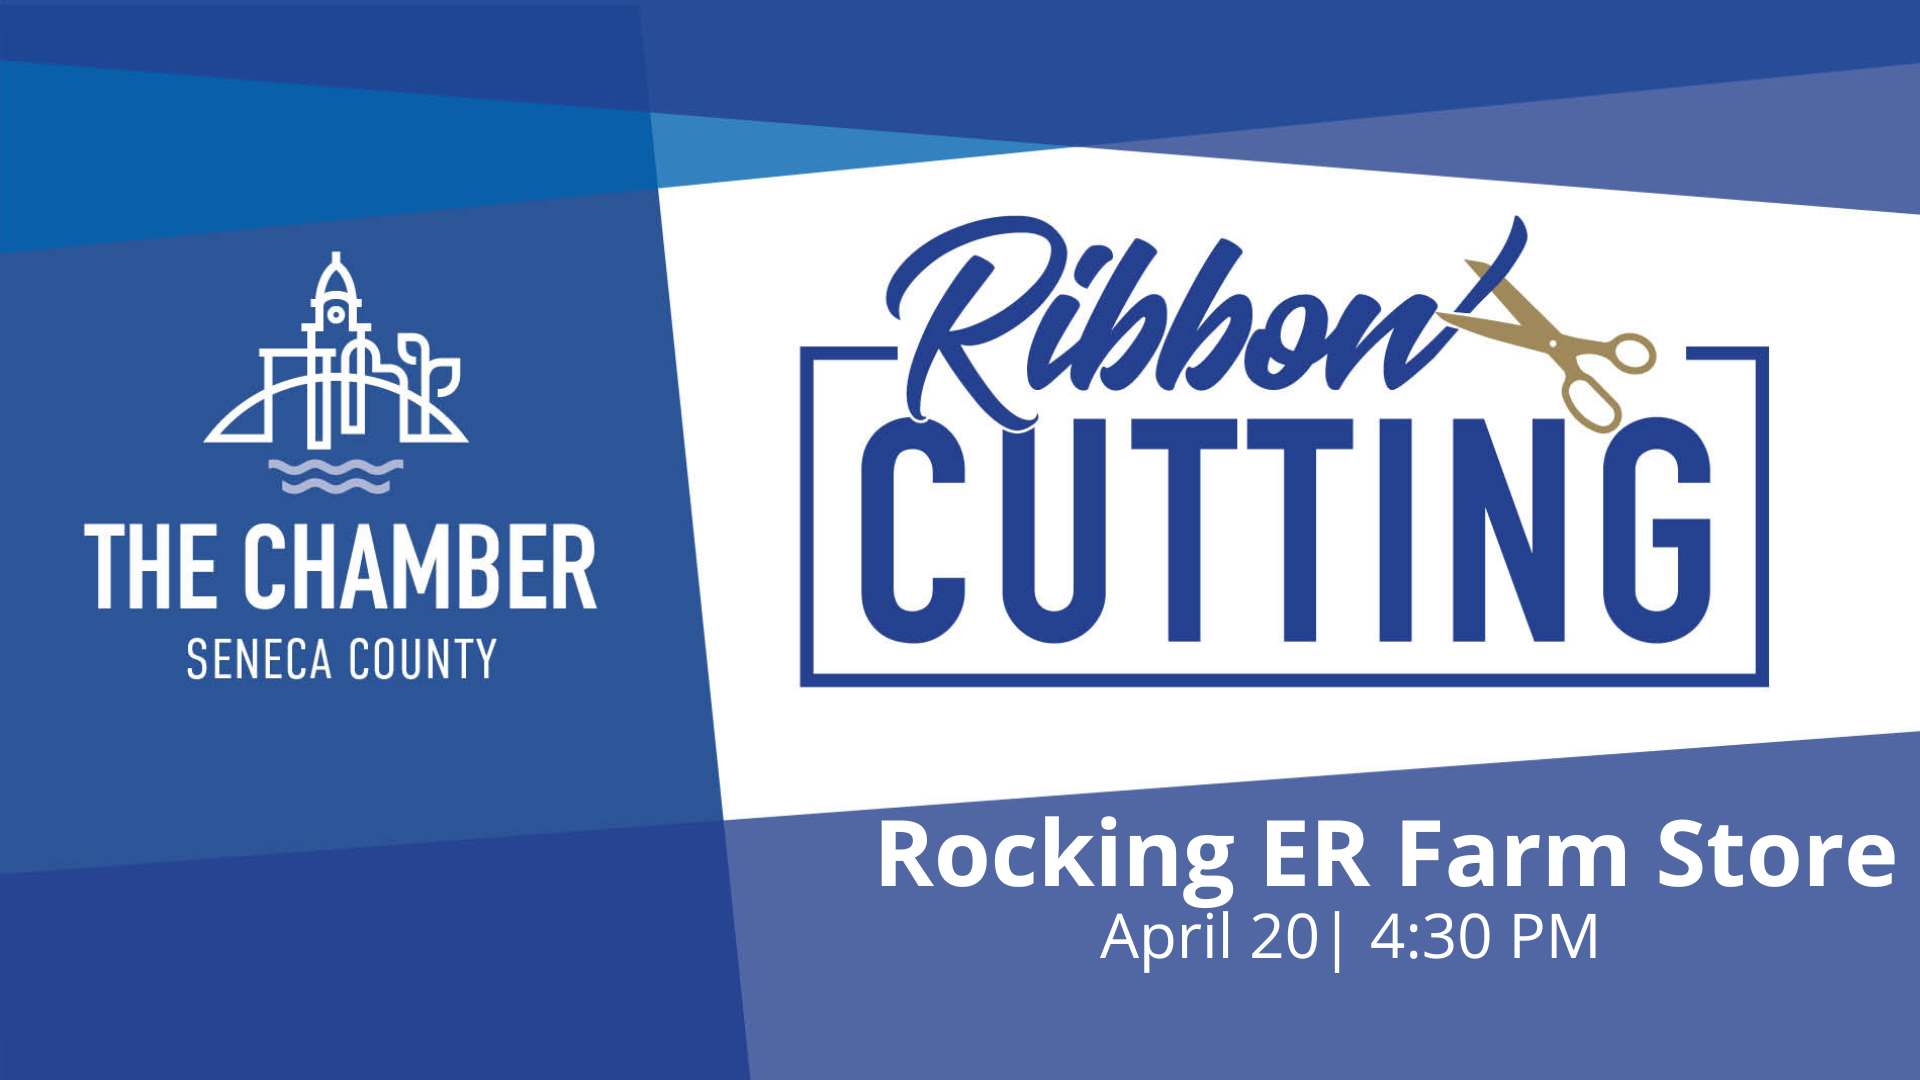 Rocking ER Farm Store to Celebrate New Location with Ribbon Cutting